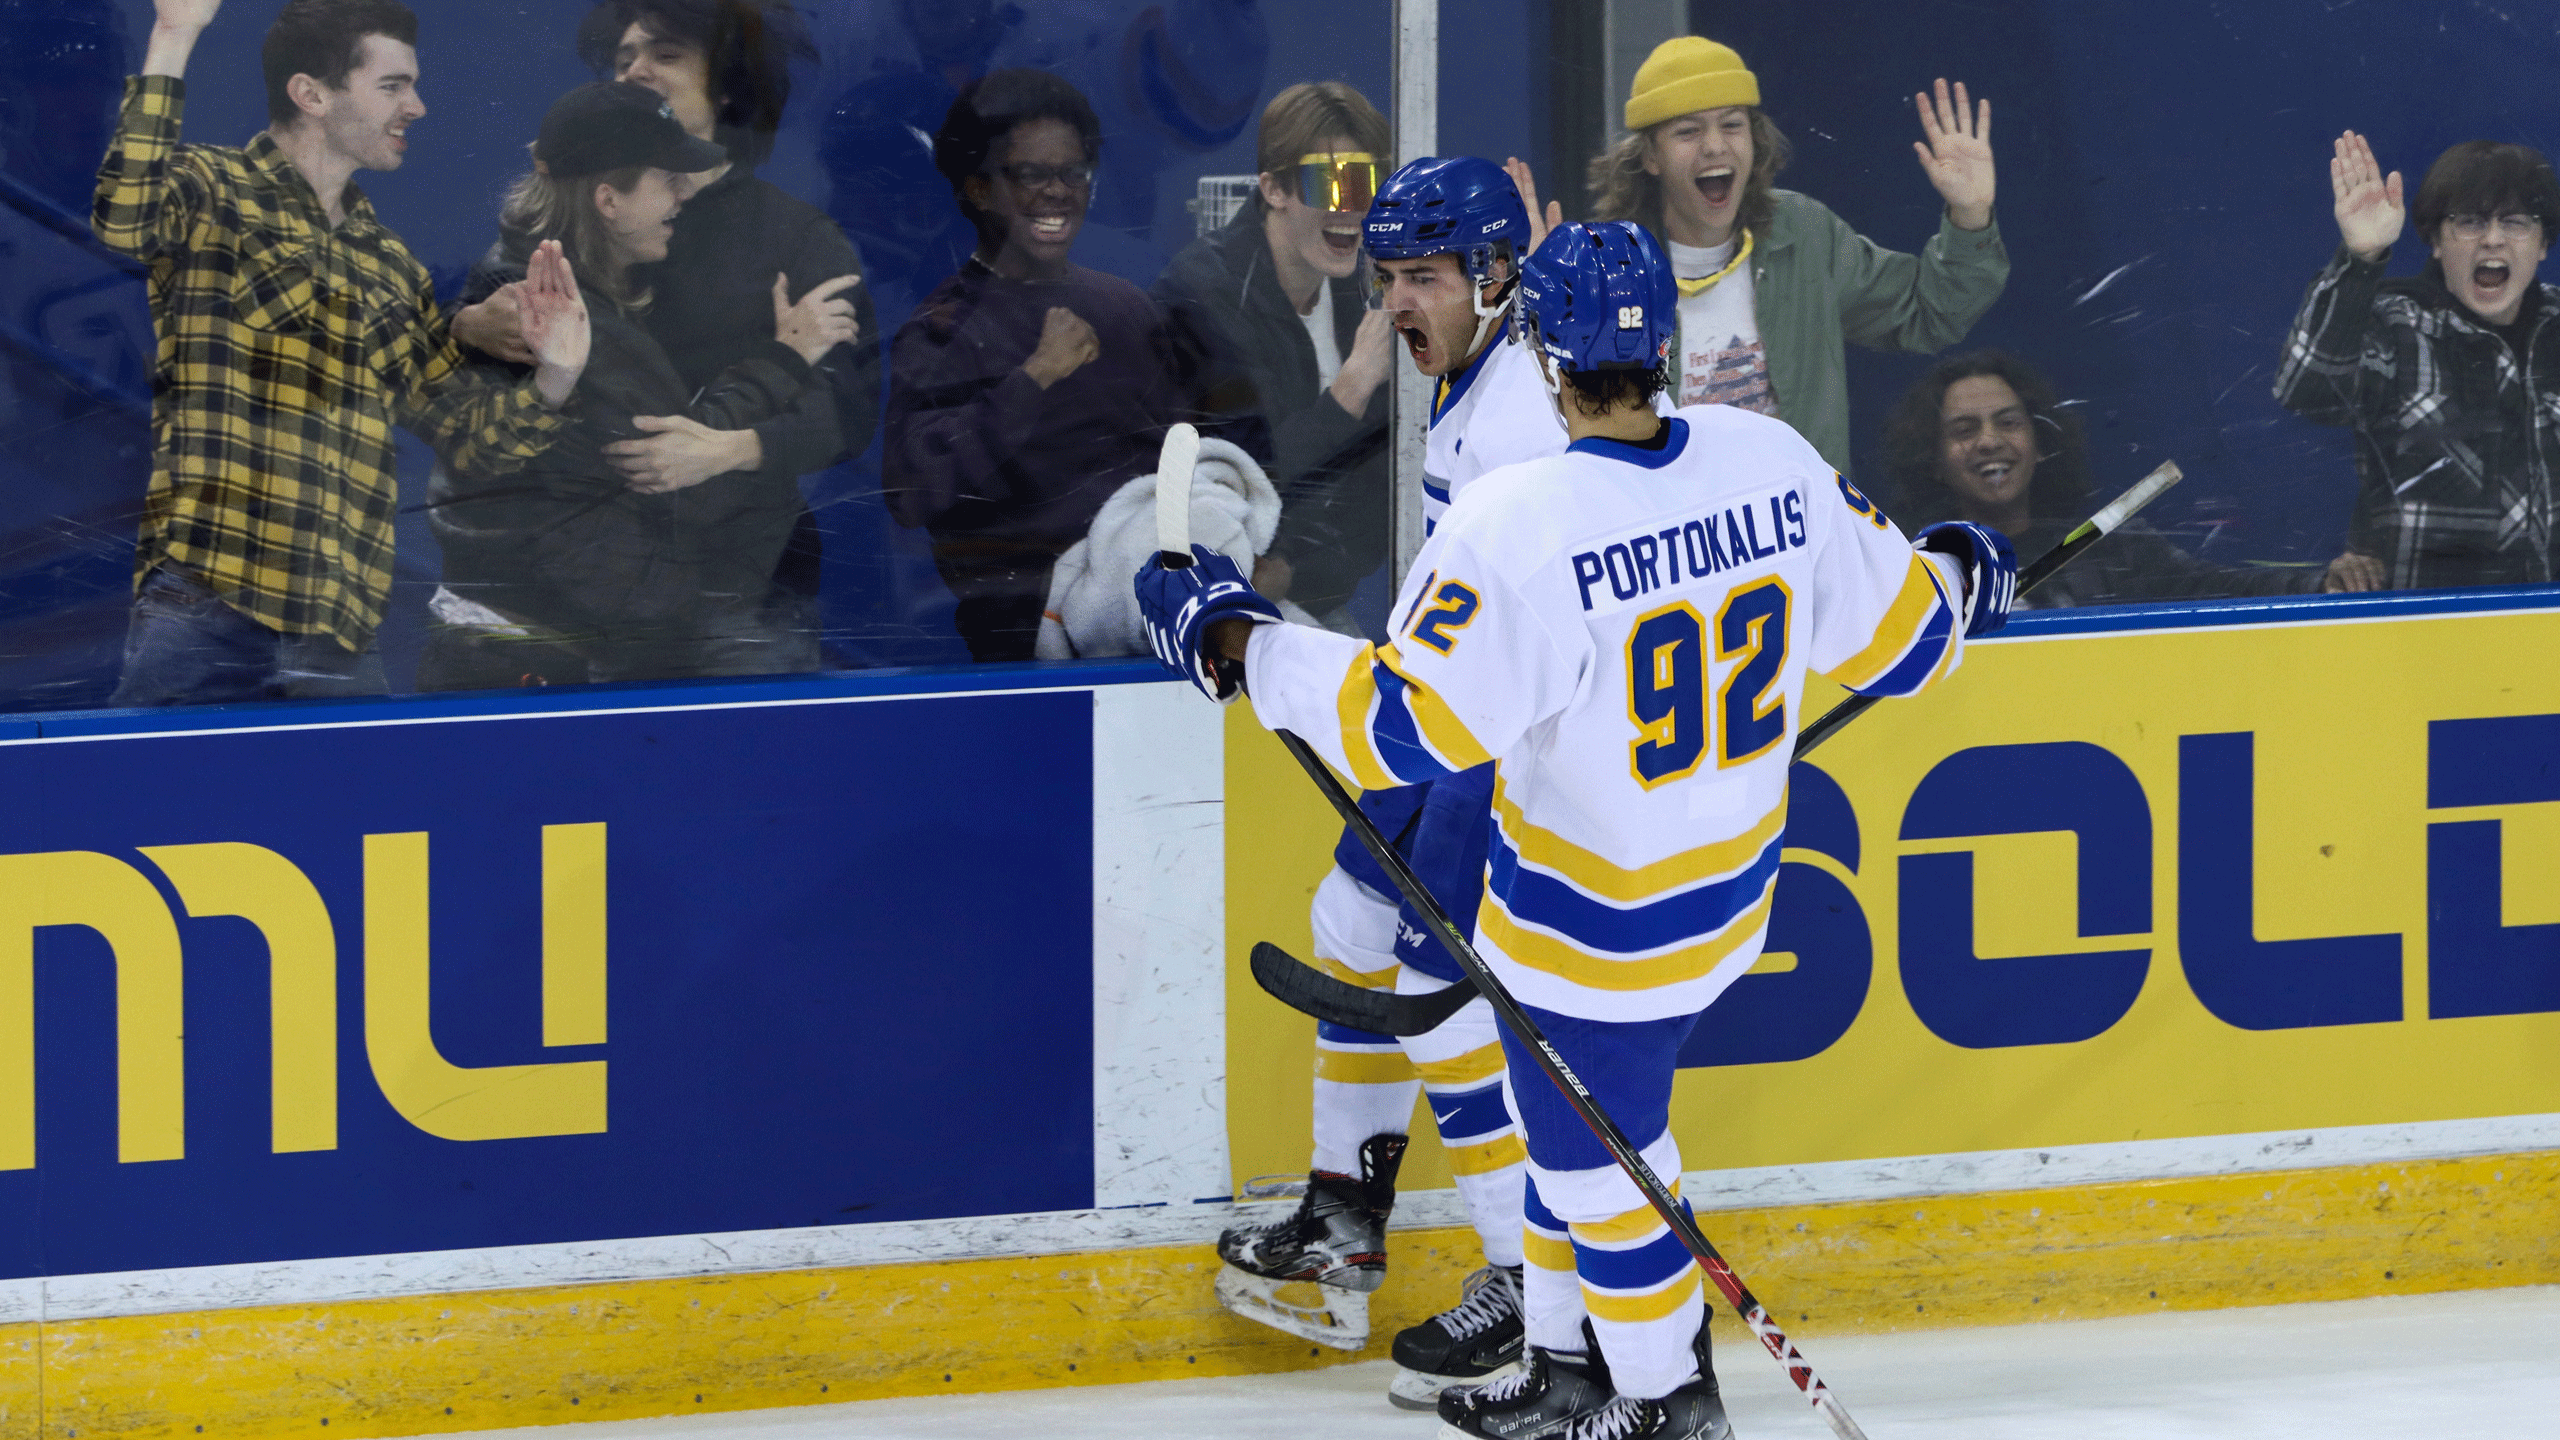 Two hockey players in white jerseys celebrate